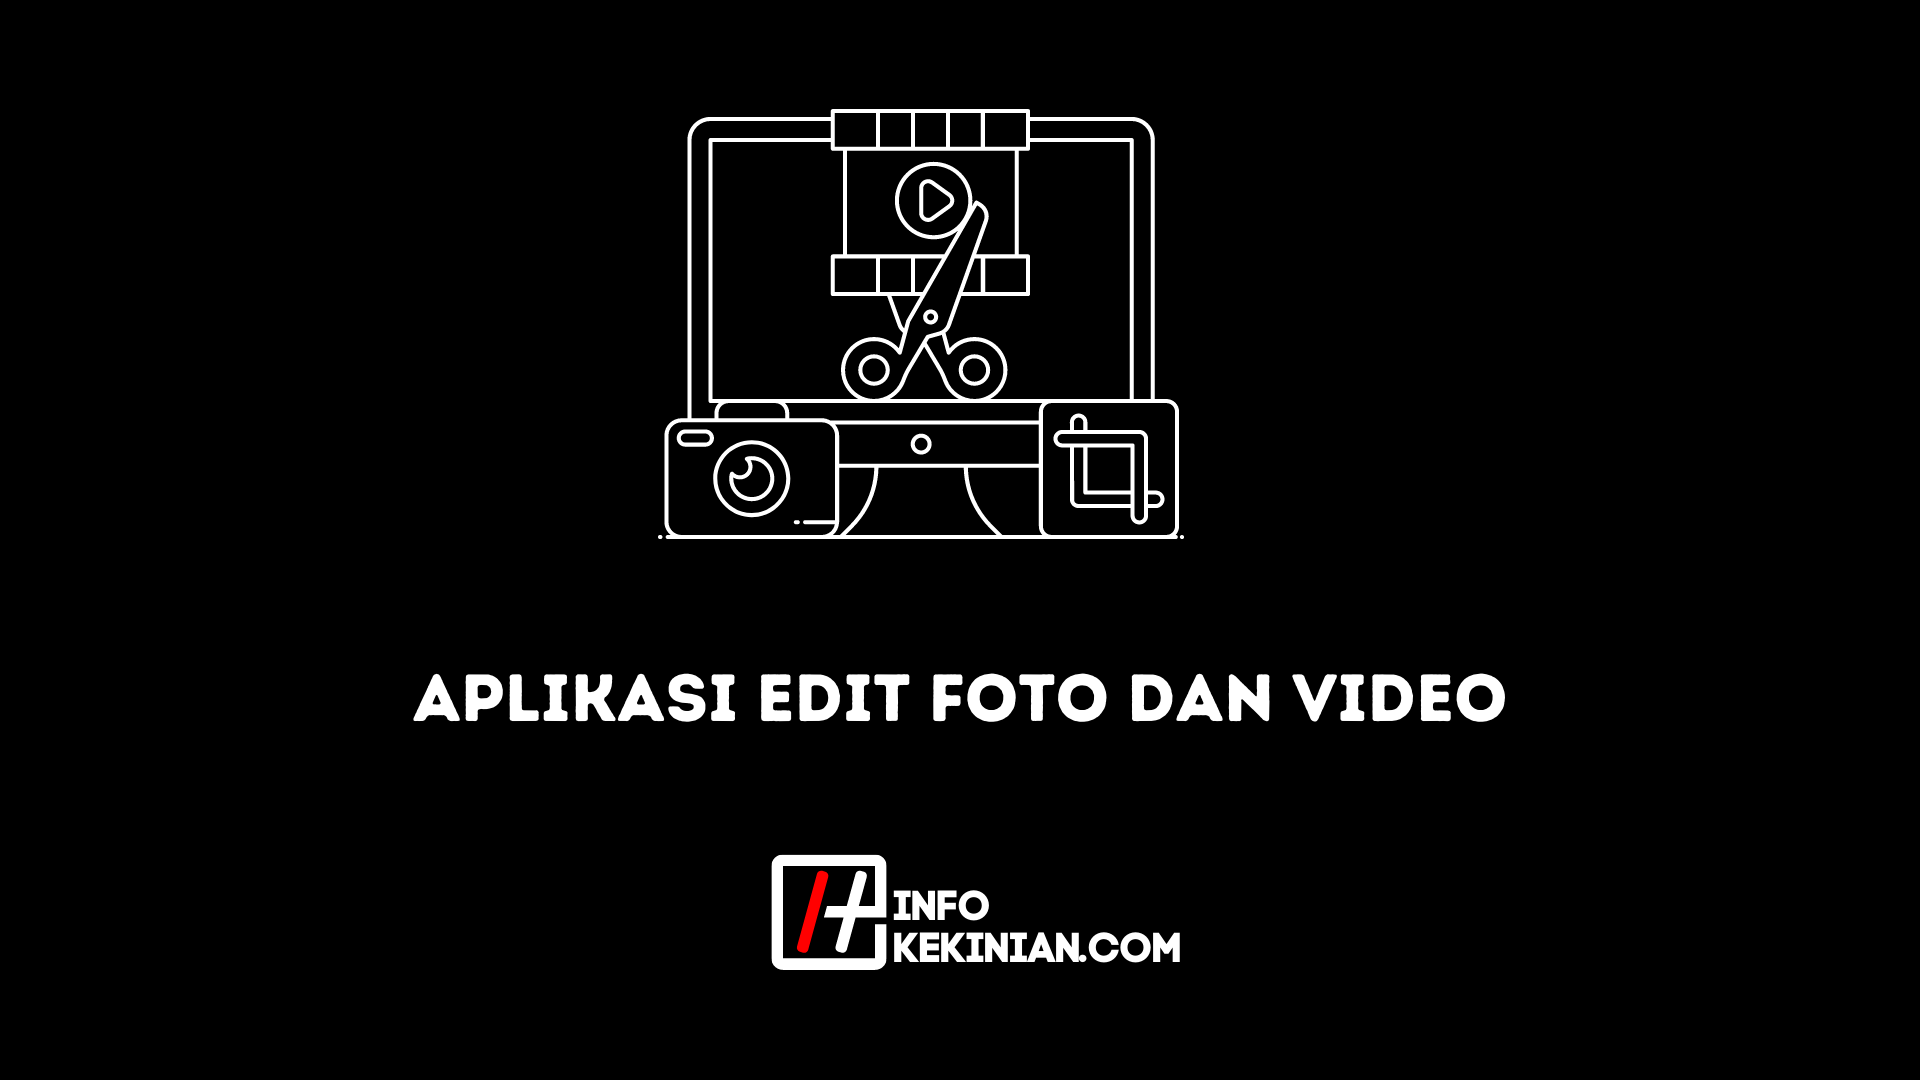 Photo and Video Editing Application